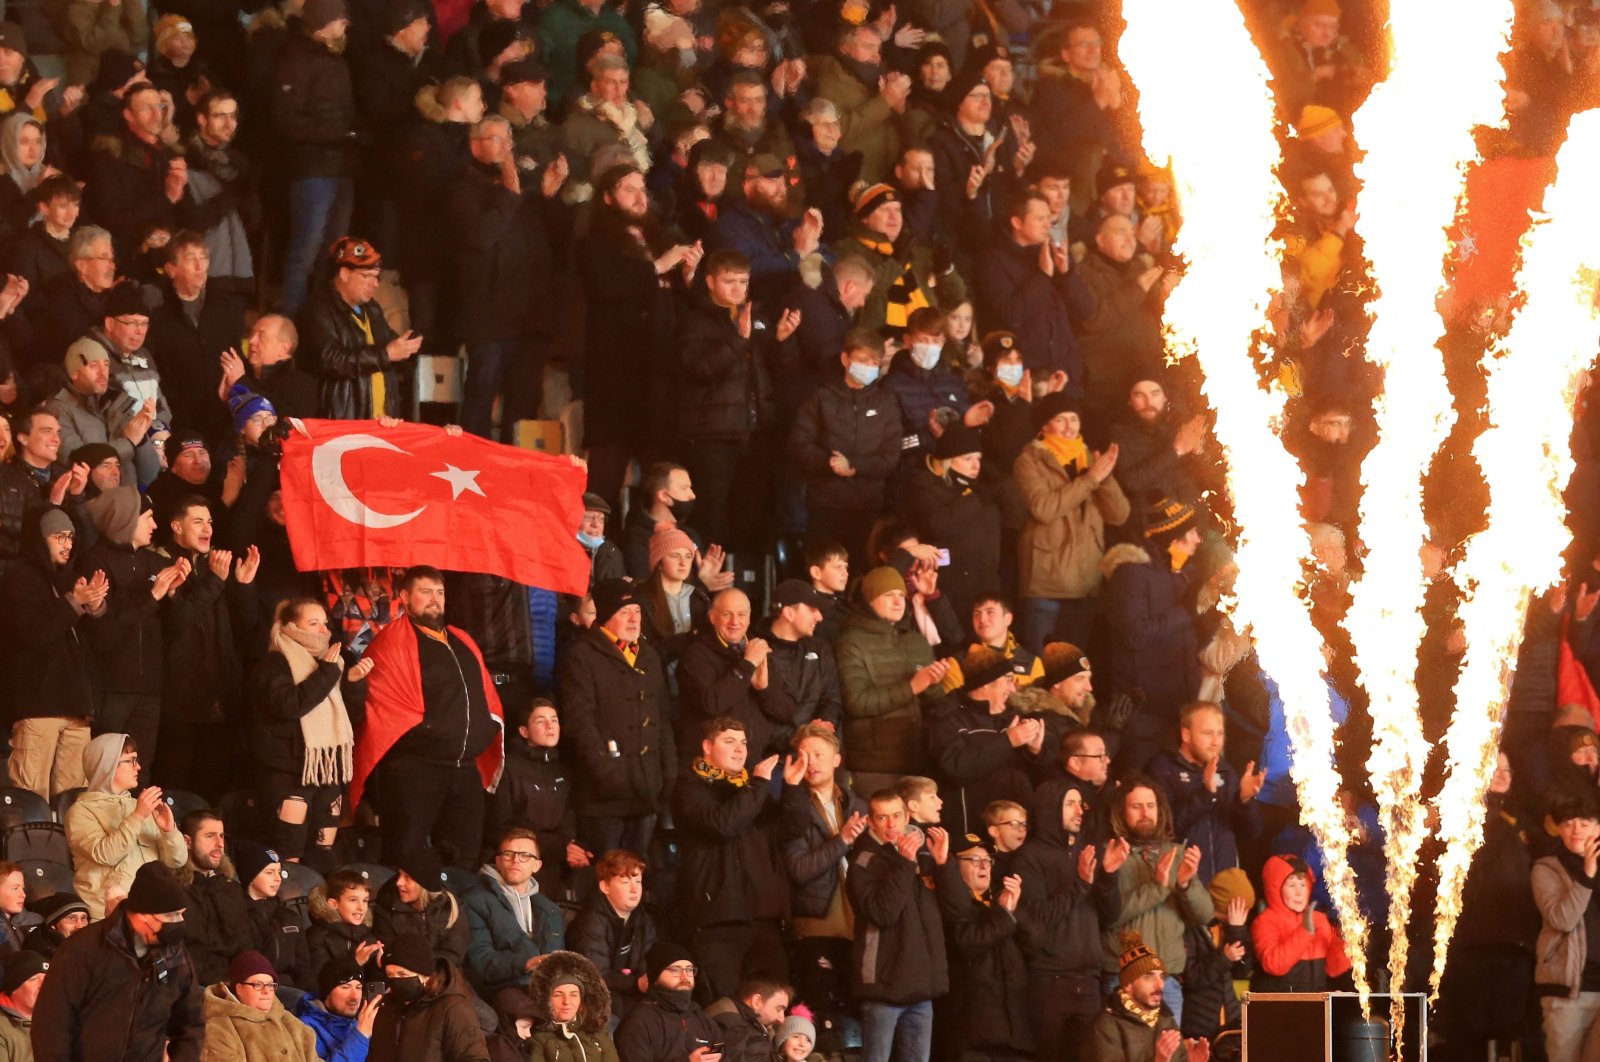 A fan holds up a Turkish flag in the crowd ahead of the English FA Cup third round football match between Hull City and Everton at the MKM Stadium in Kingston upon Hull, northeast England, Jan. 8, 2022. (AFP File Photo)